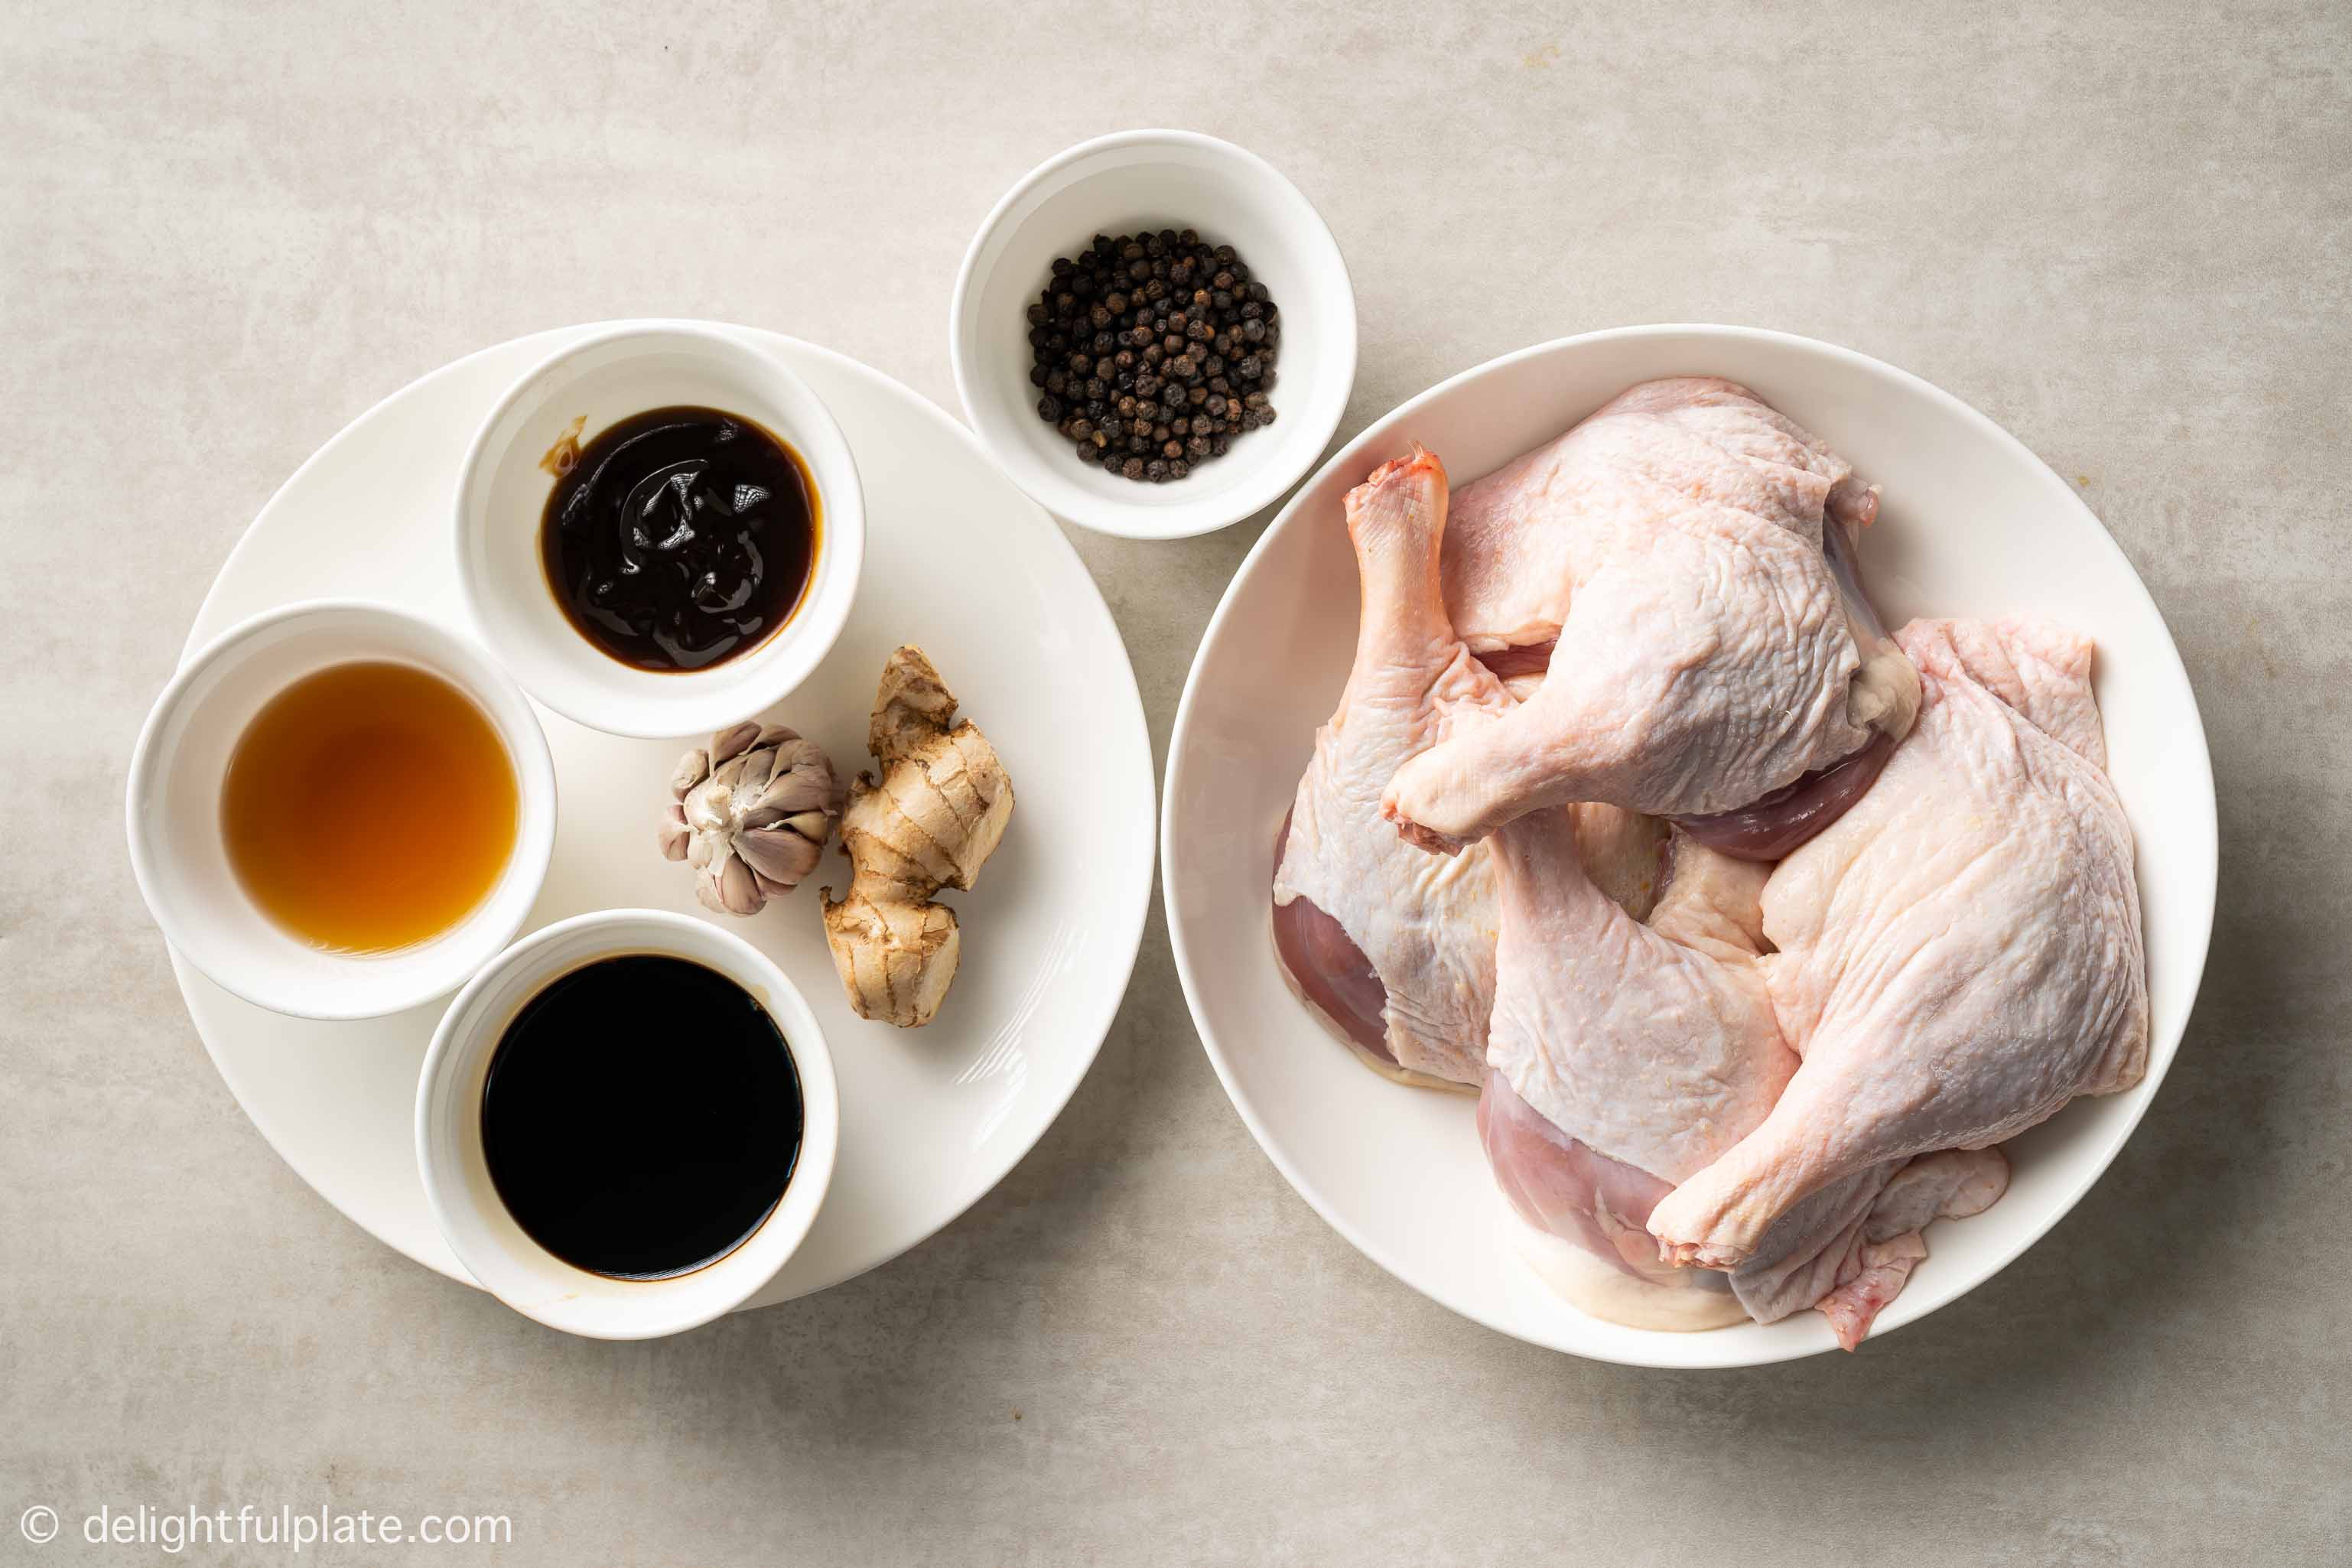 plates and bowls containing ingredients for this roasted duck legs recipe